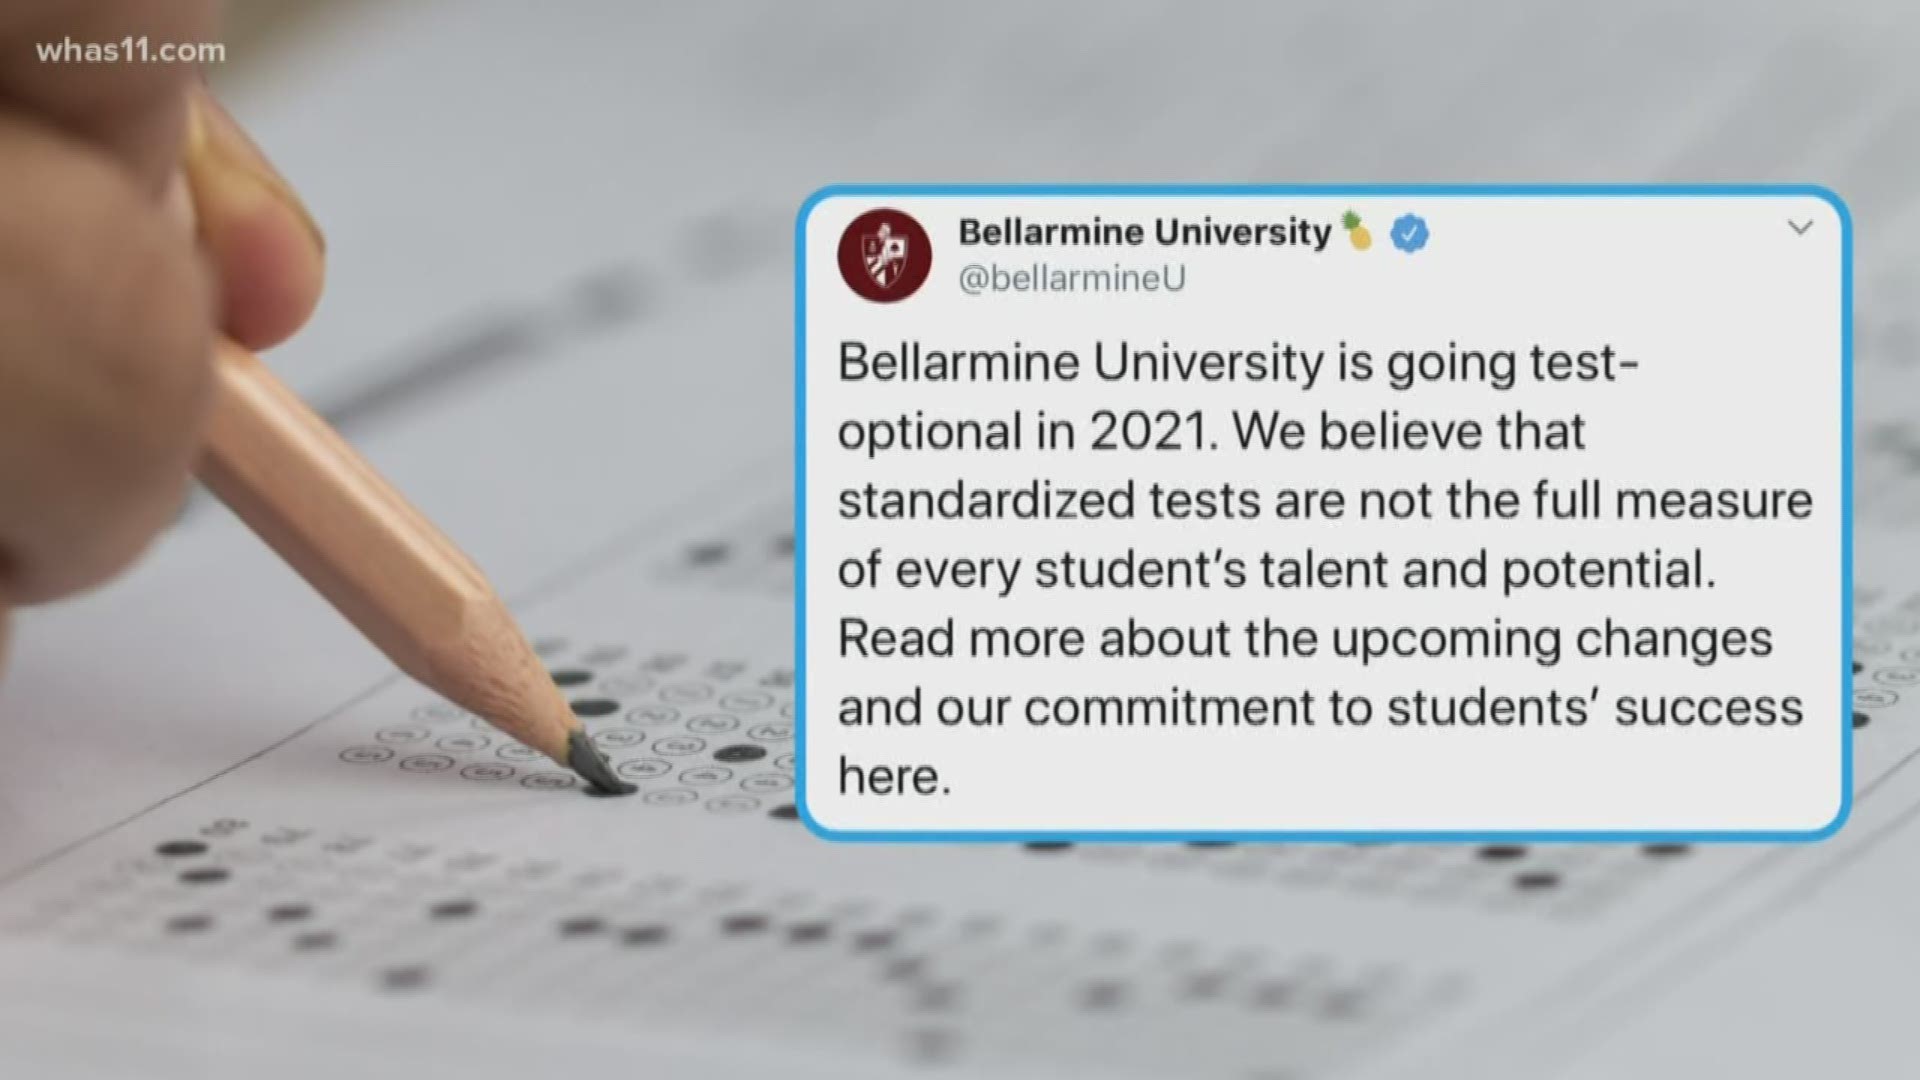 The school said standardized tests do not fully measure the talent and potential of every student.